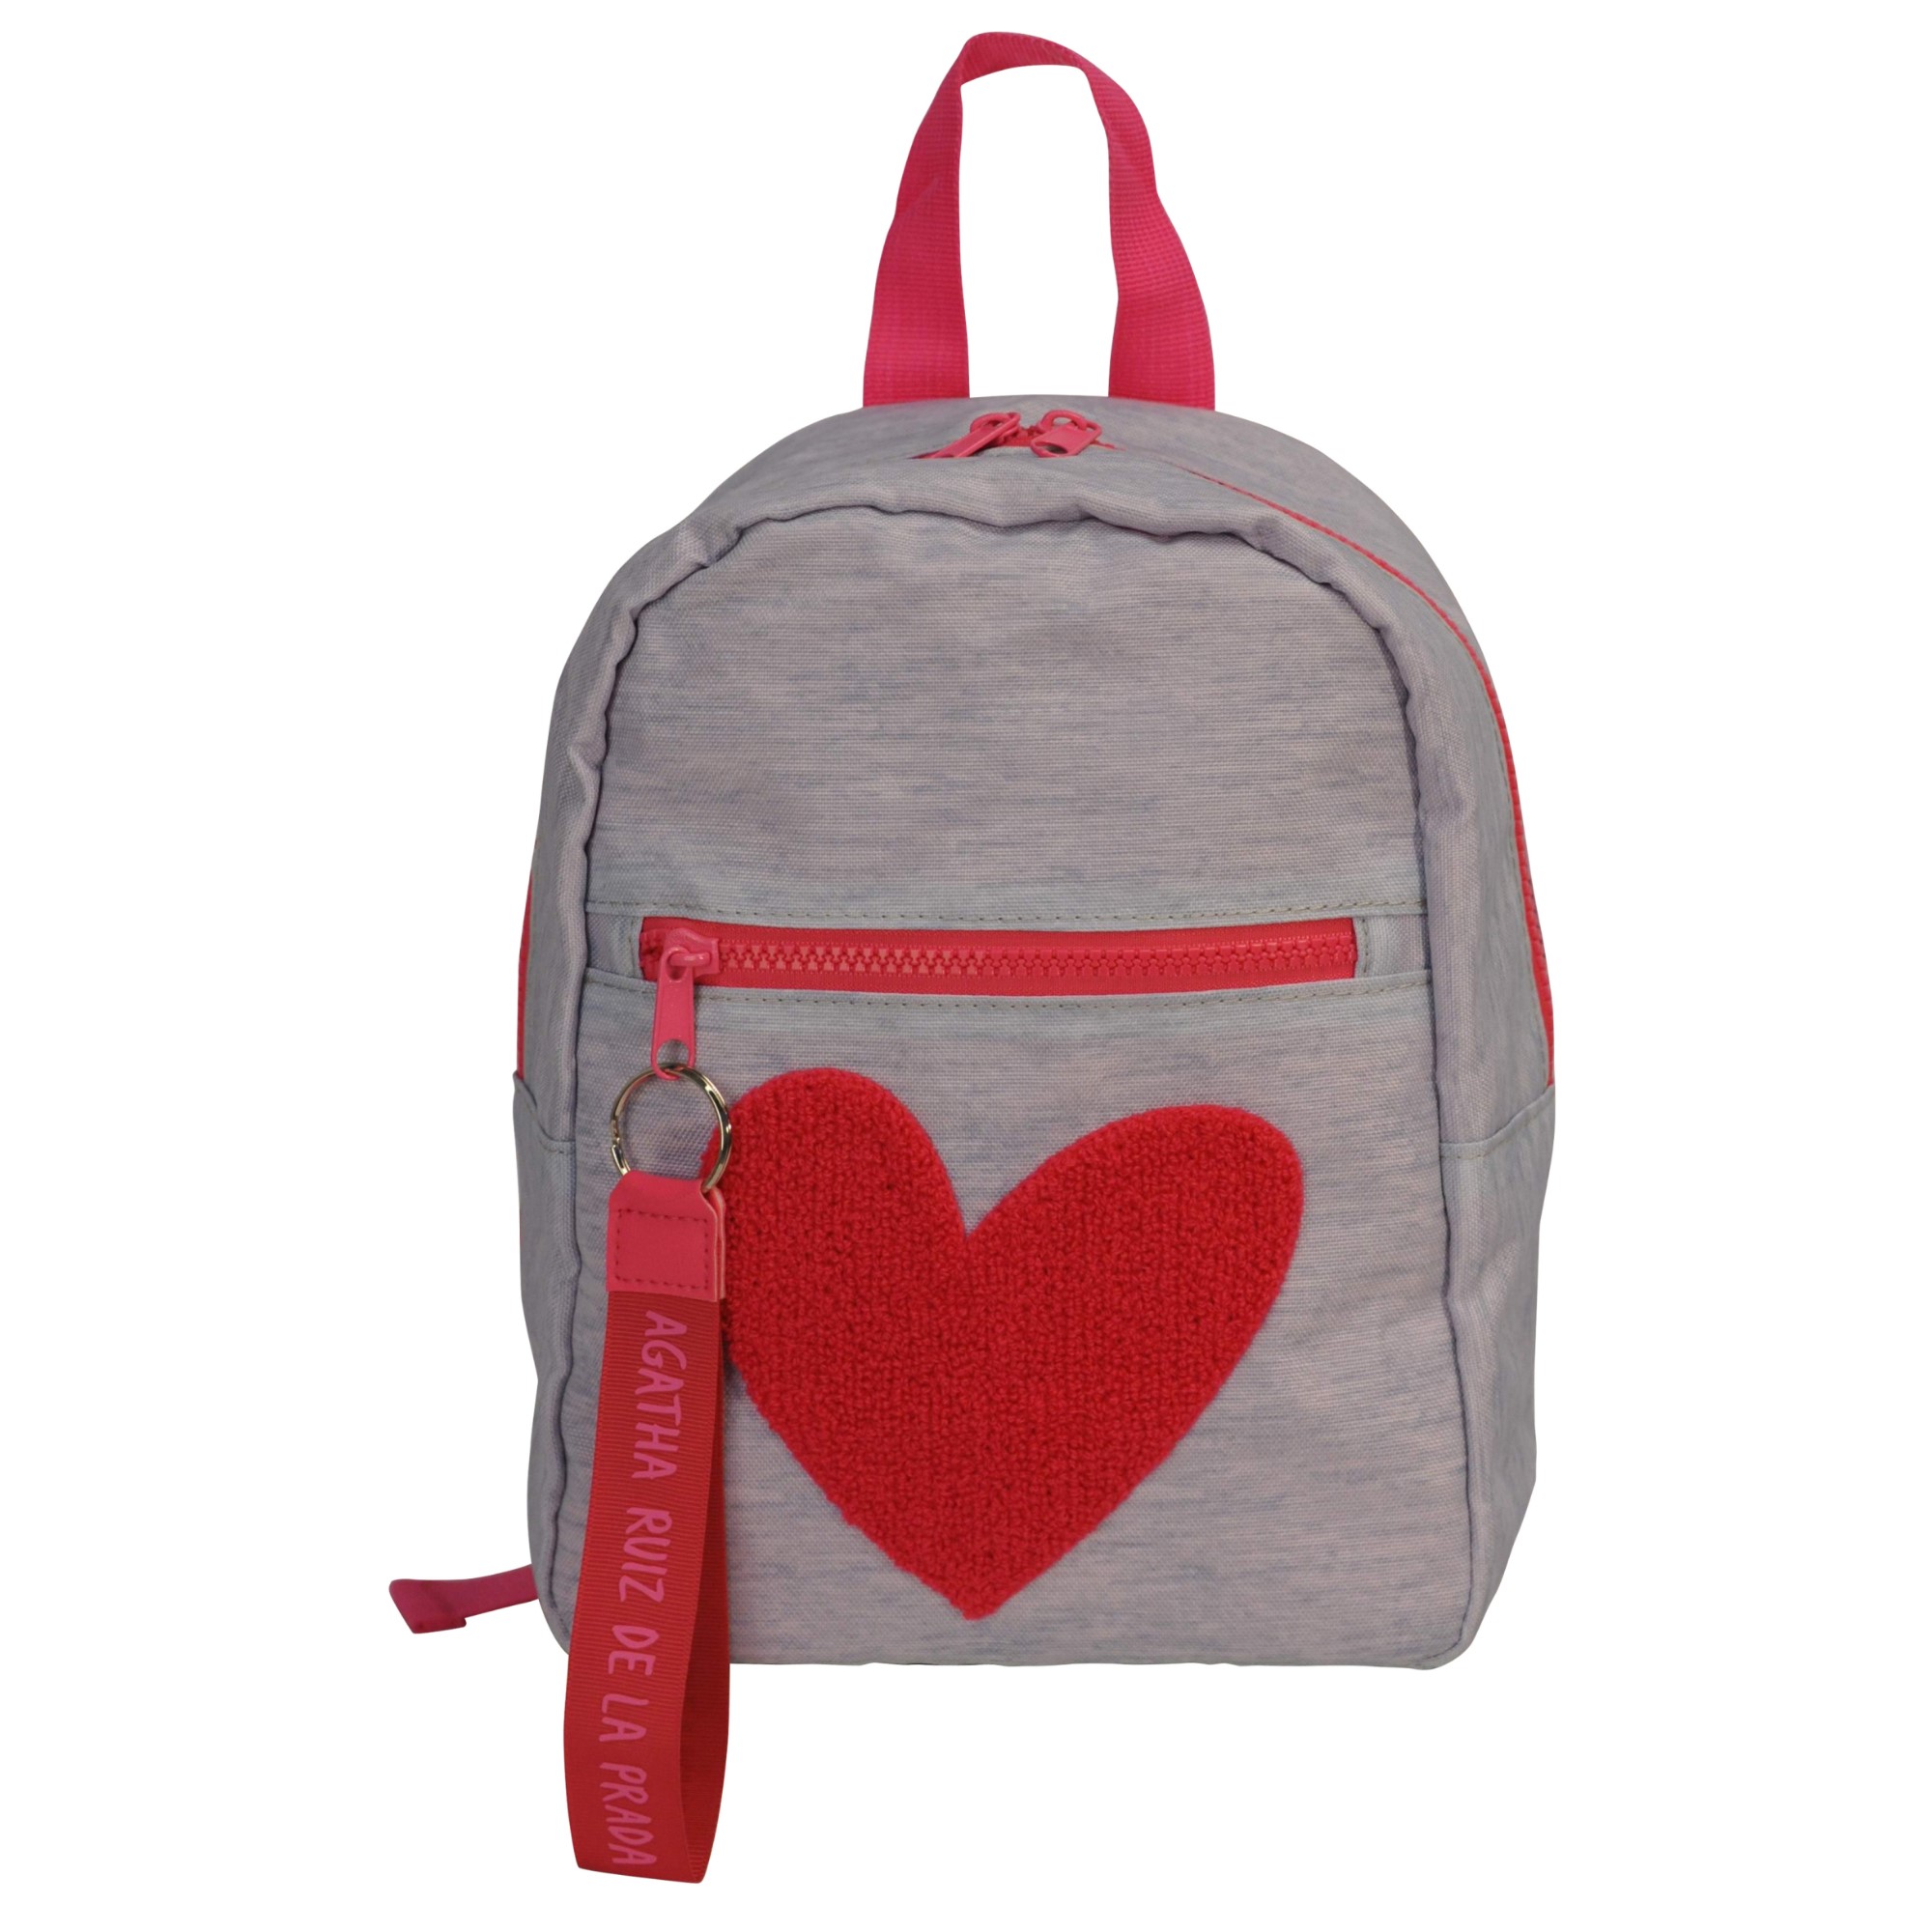 OEM Mini Backpack Nylon Purse Fashion College Bag | Daypack with heart-shaped embroidery